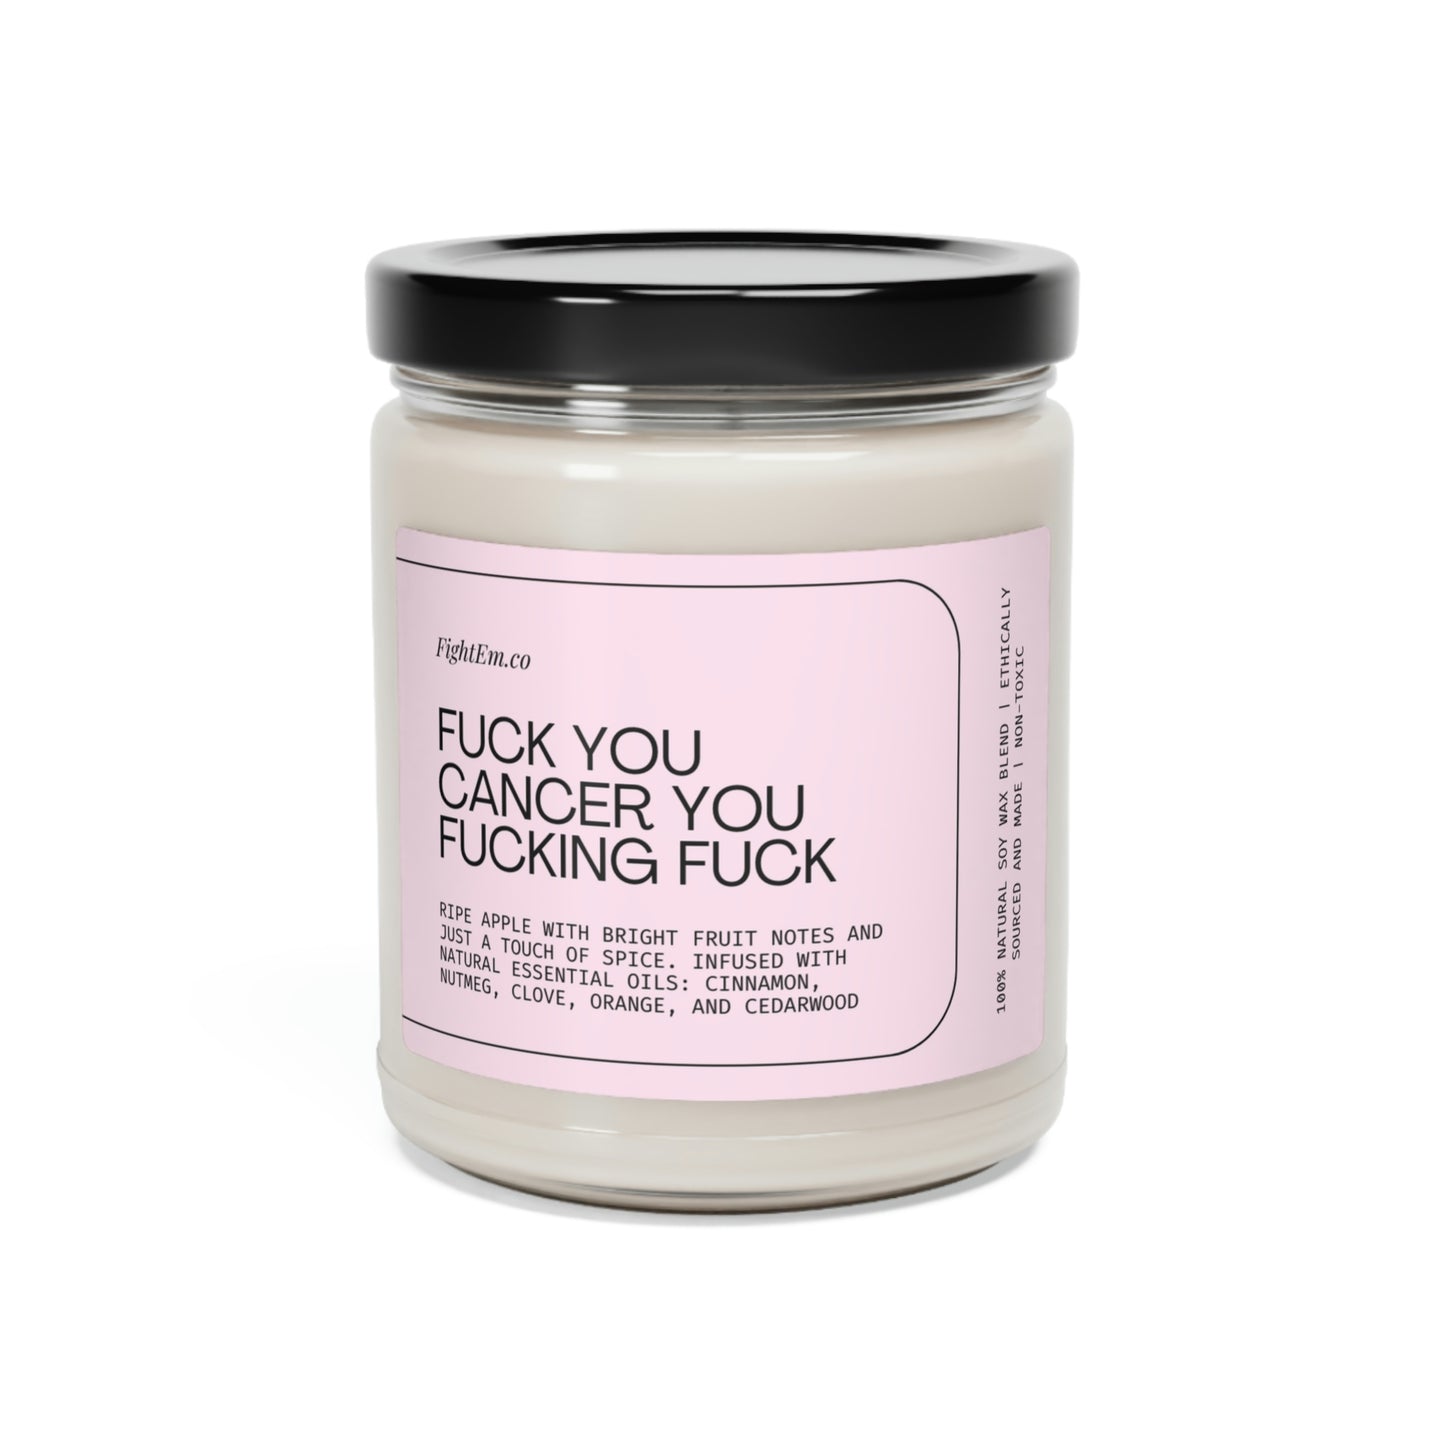 F*ck You Cancer Scented Soy Candle 9oz 100% Natural Soy Wax Blend